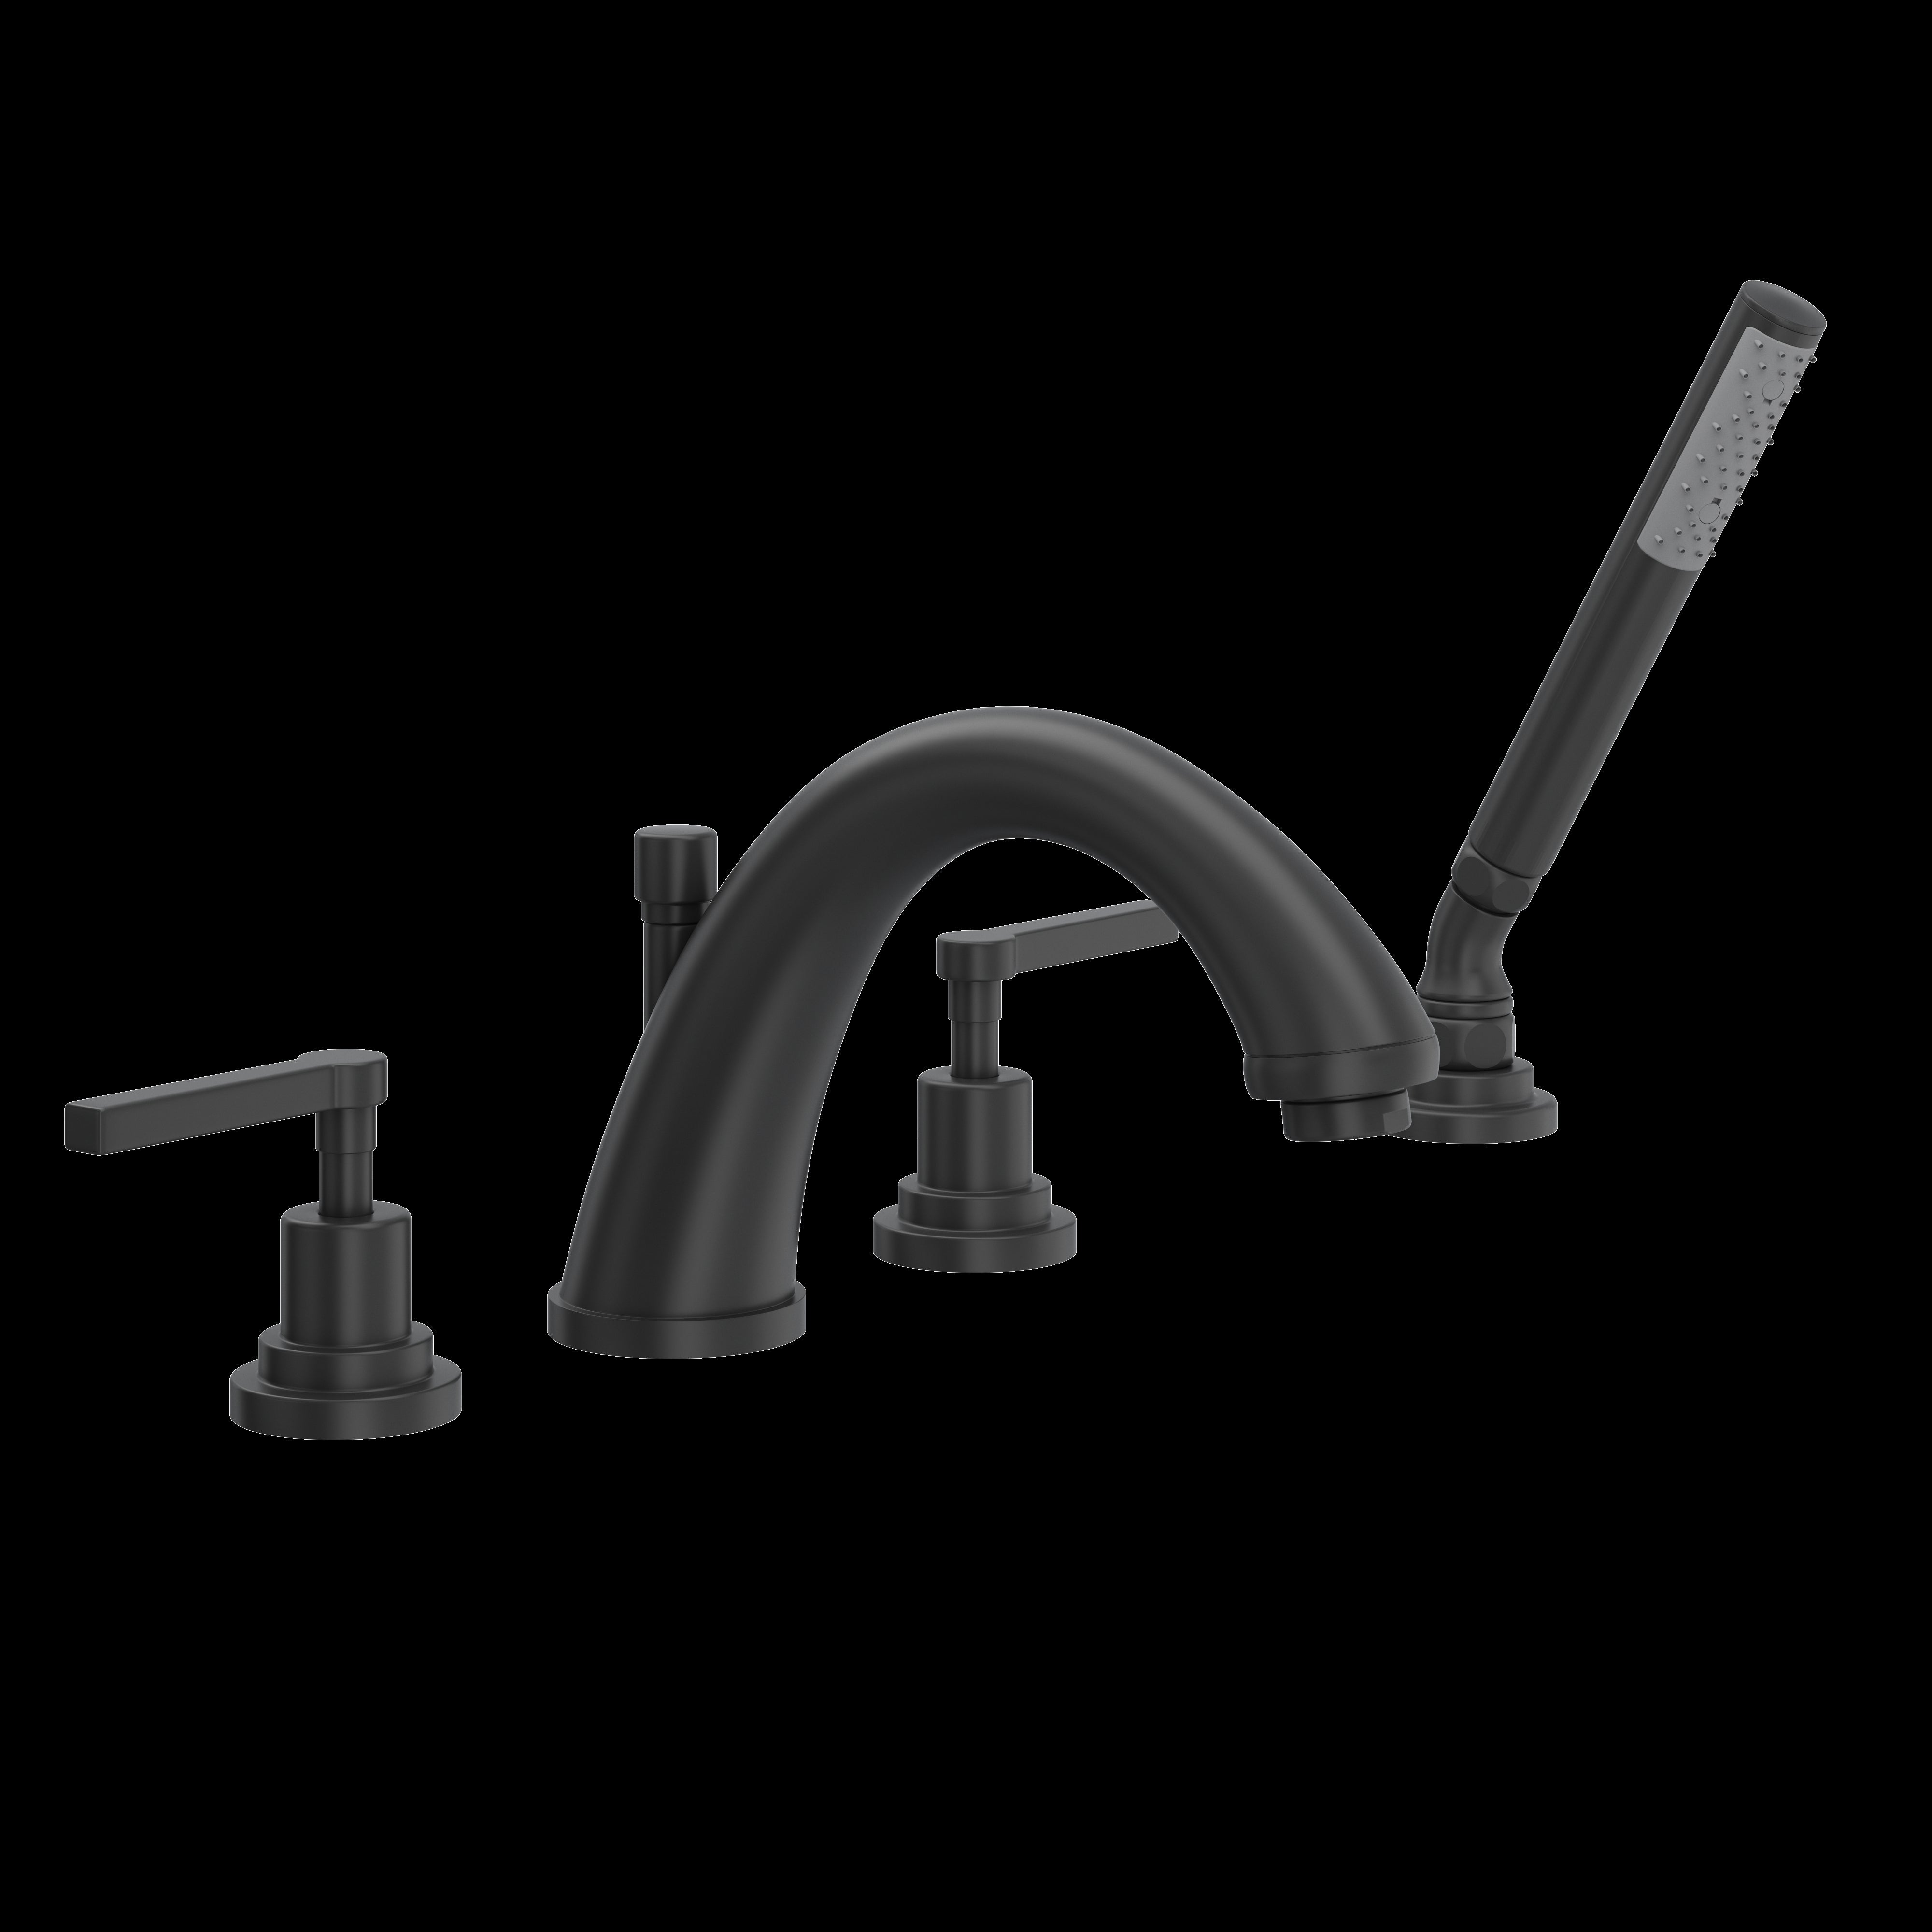 ROHL A1264 Lombardia 4-Hole Deck Mount Tub Filler